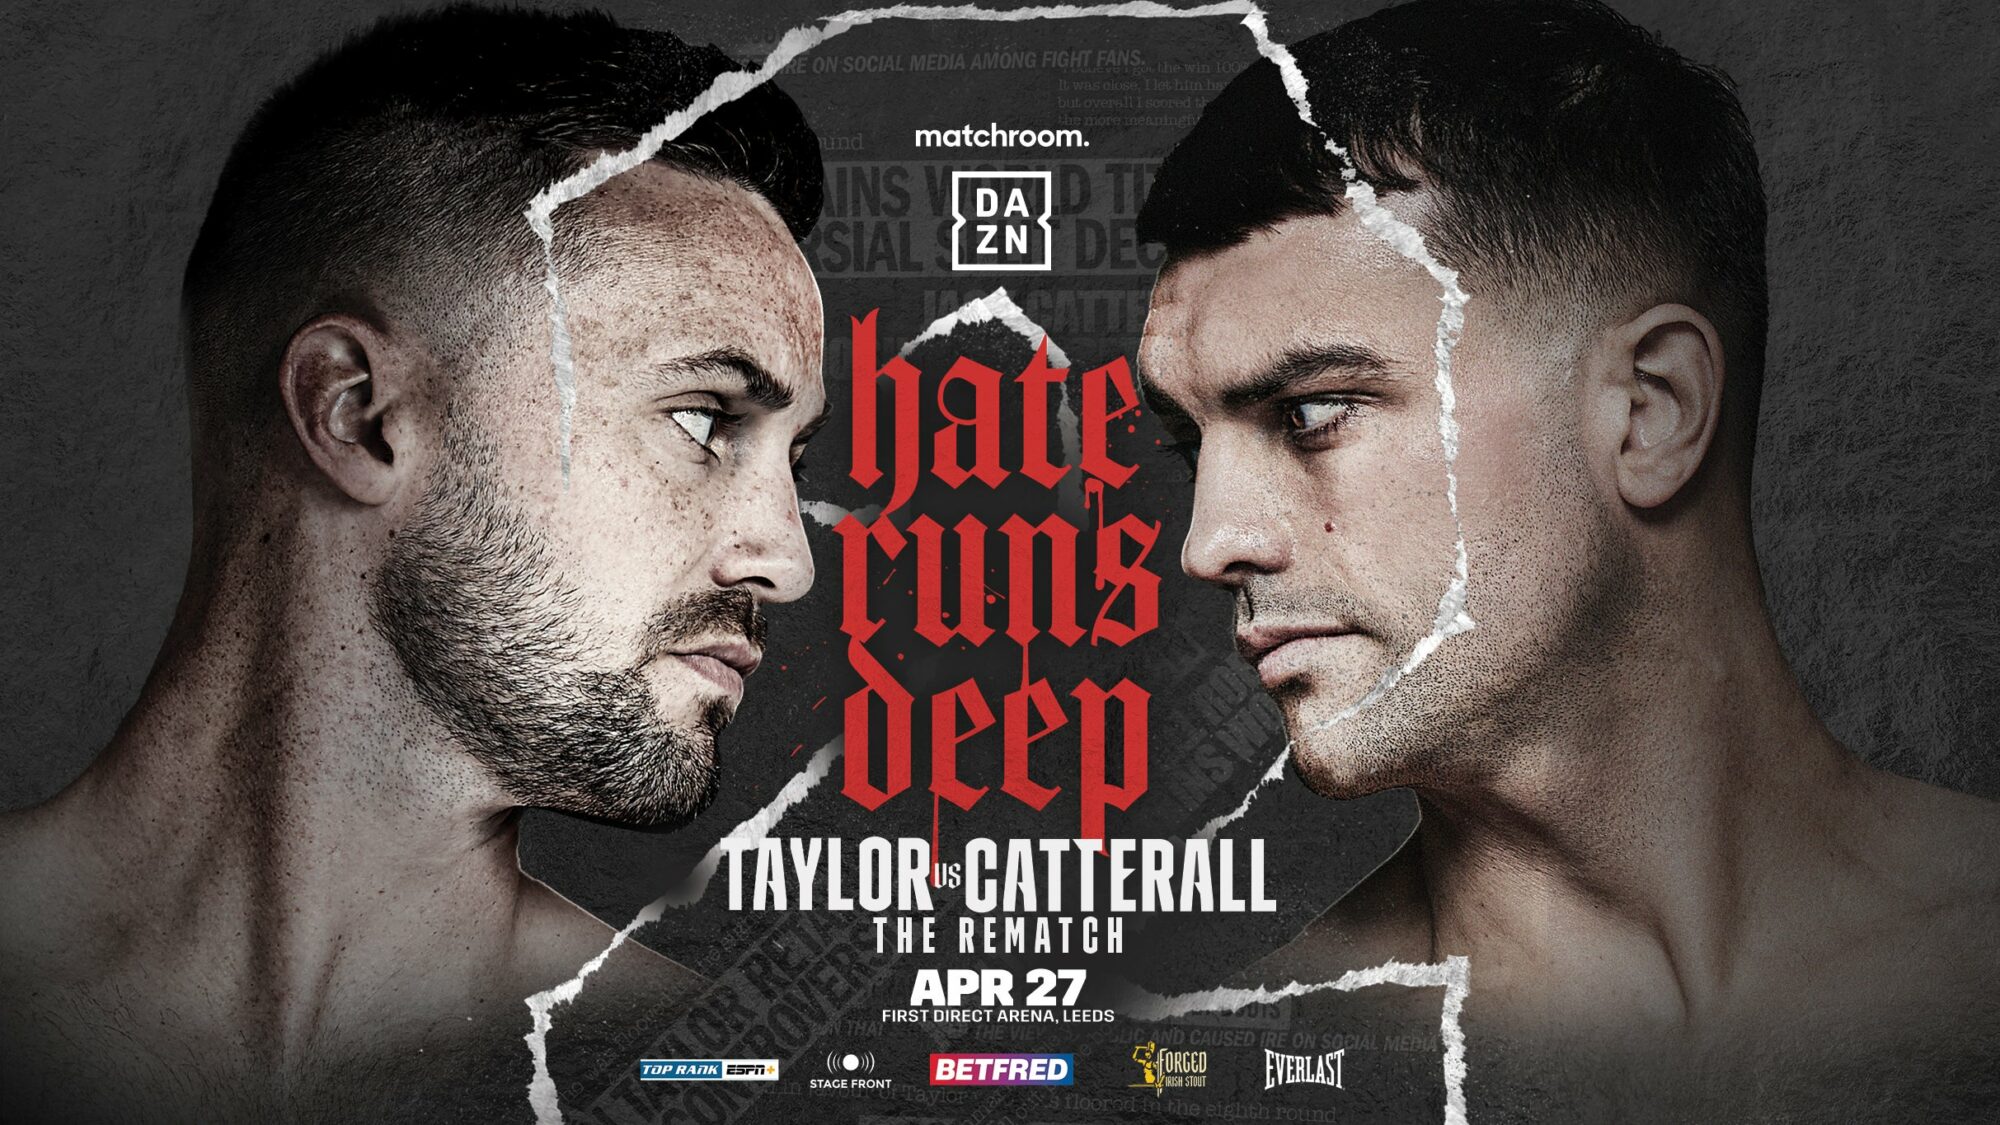 Image name Matchroom Boxing Josh Taylor vs Jack Catterall at First Direct Arena Leeds the 22 image from the post Matchroom Boxing: Josh Taylor vs Jack Catterall at First Direct Arena, Leeds in Yorkshire.com.